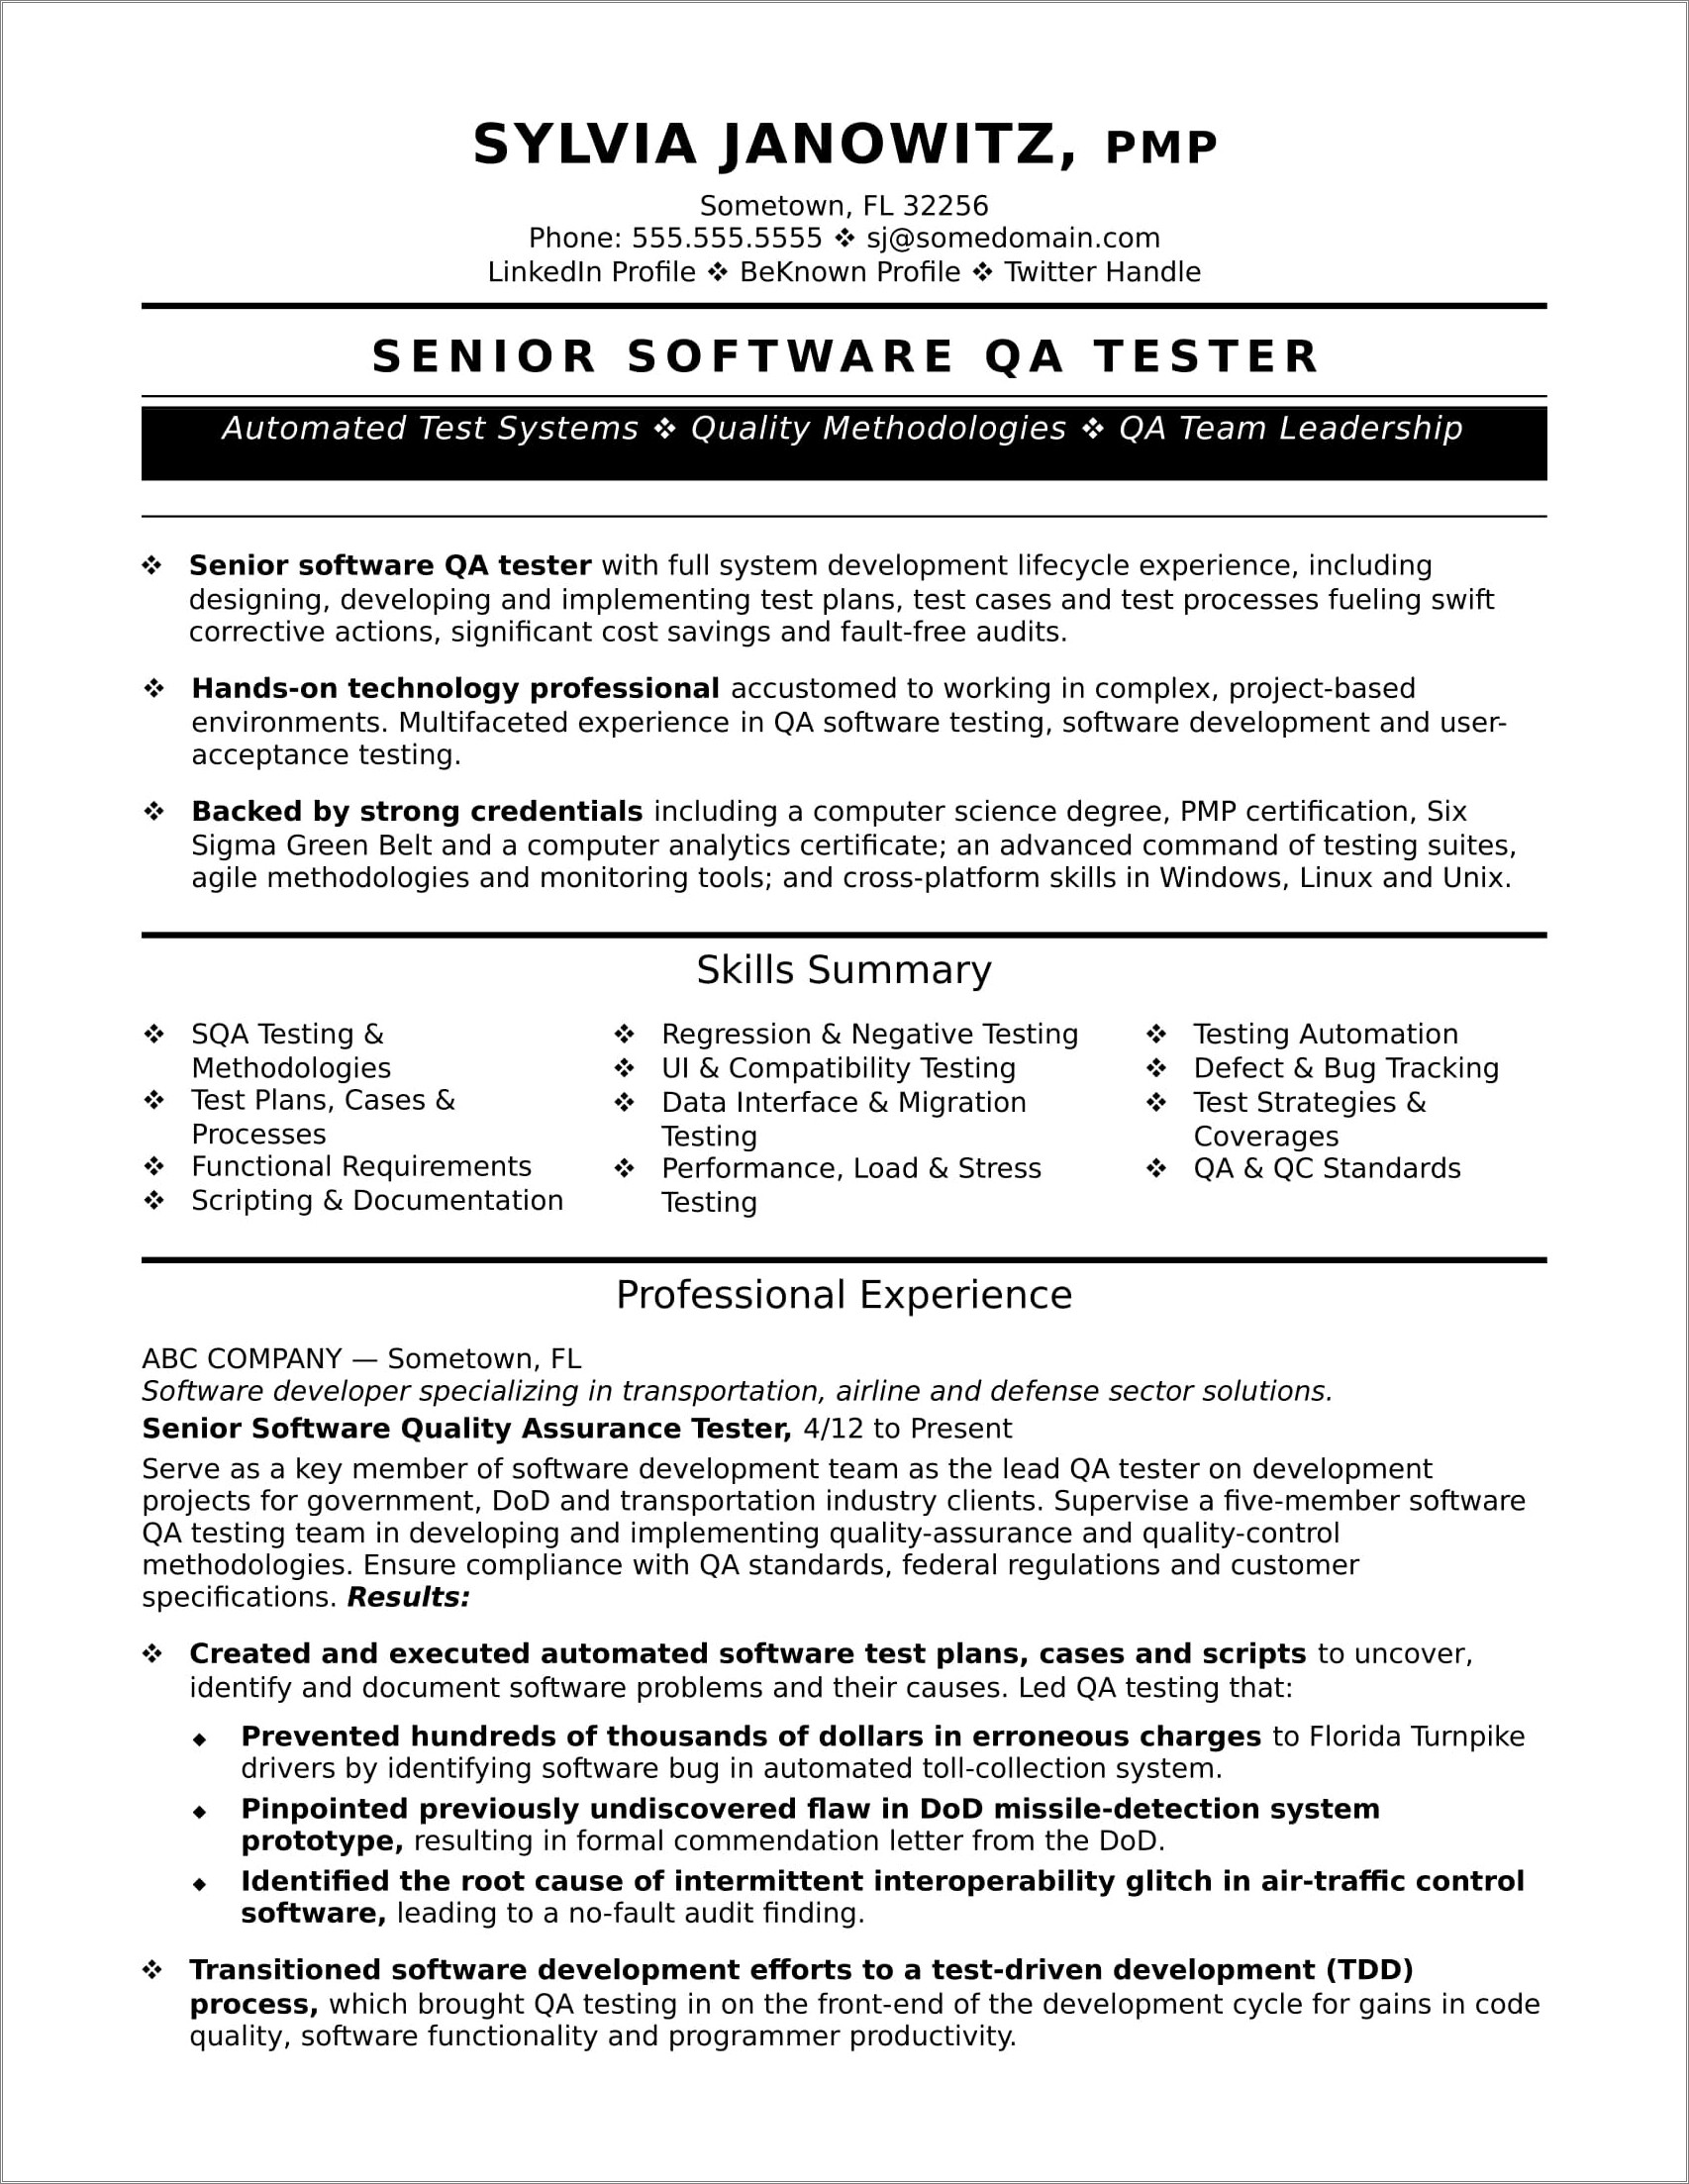 Resume Objective For Qa Tester Position